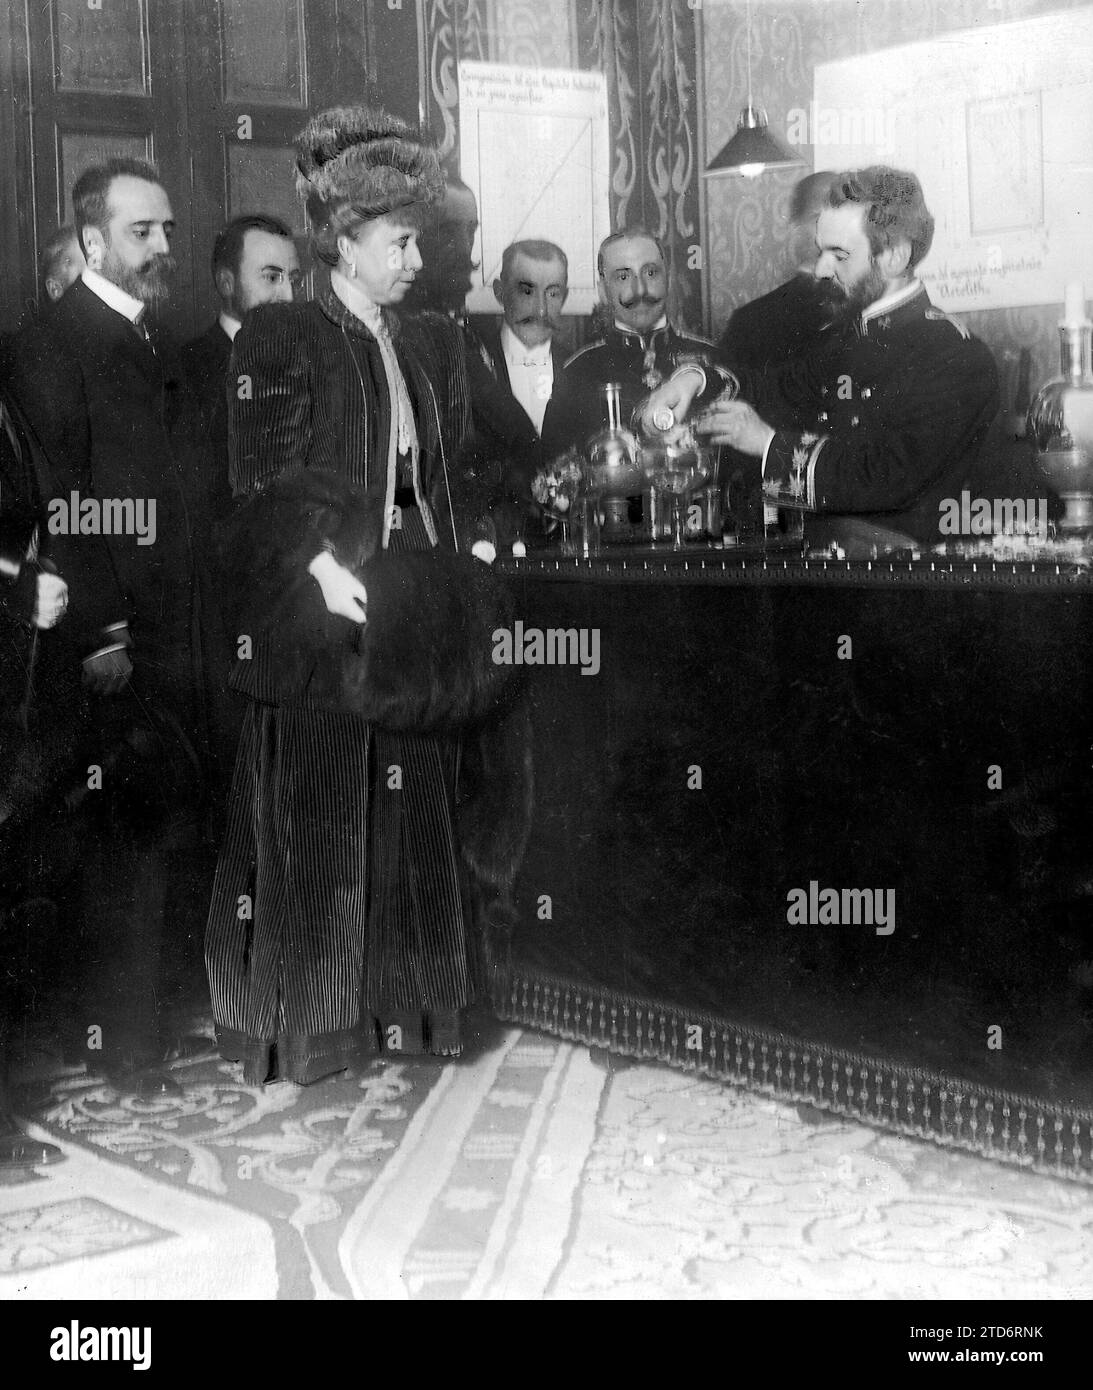 11/30/1908. At the School of Mining Engineers. HM Queen María Cristina with the Minister of Development, Mr. Sánchez Guerra (X), Visiting the Classes. Credit: Album / Archivo ABC / Francisco Goñi Stock Photo